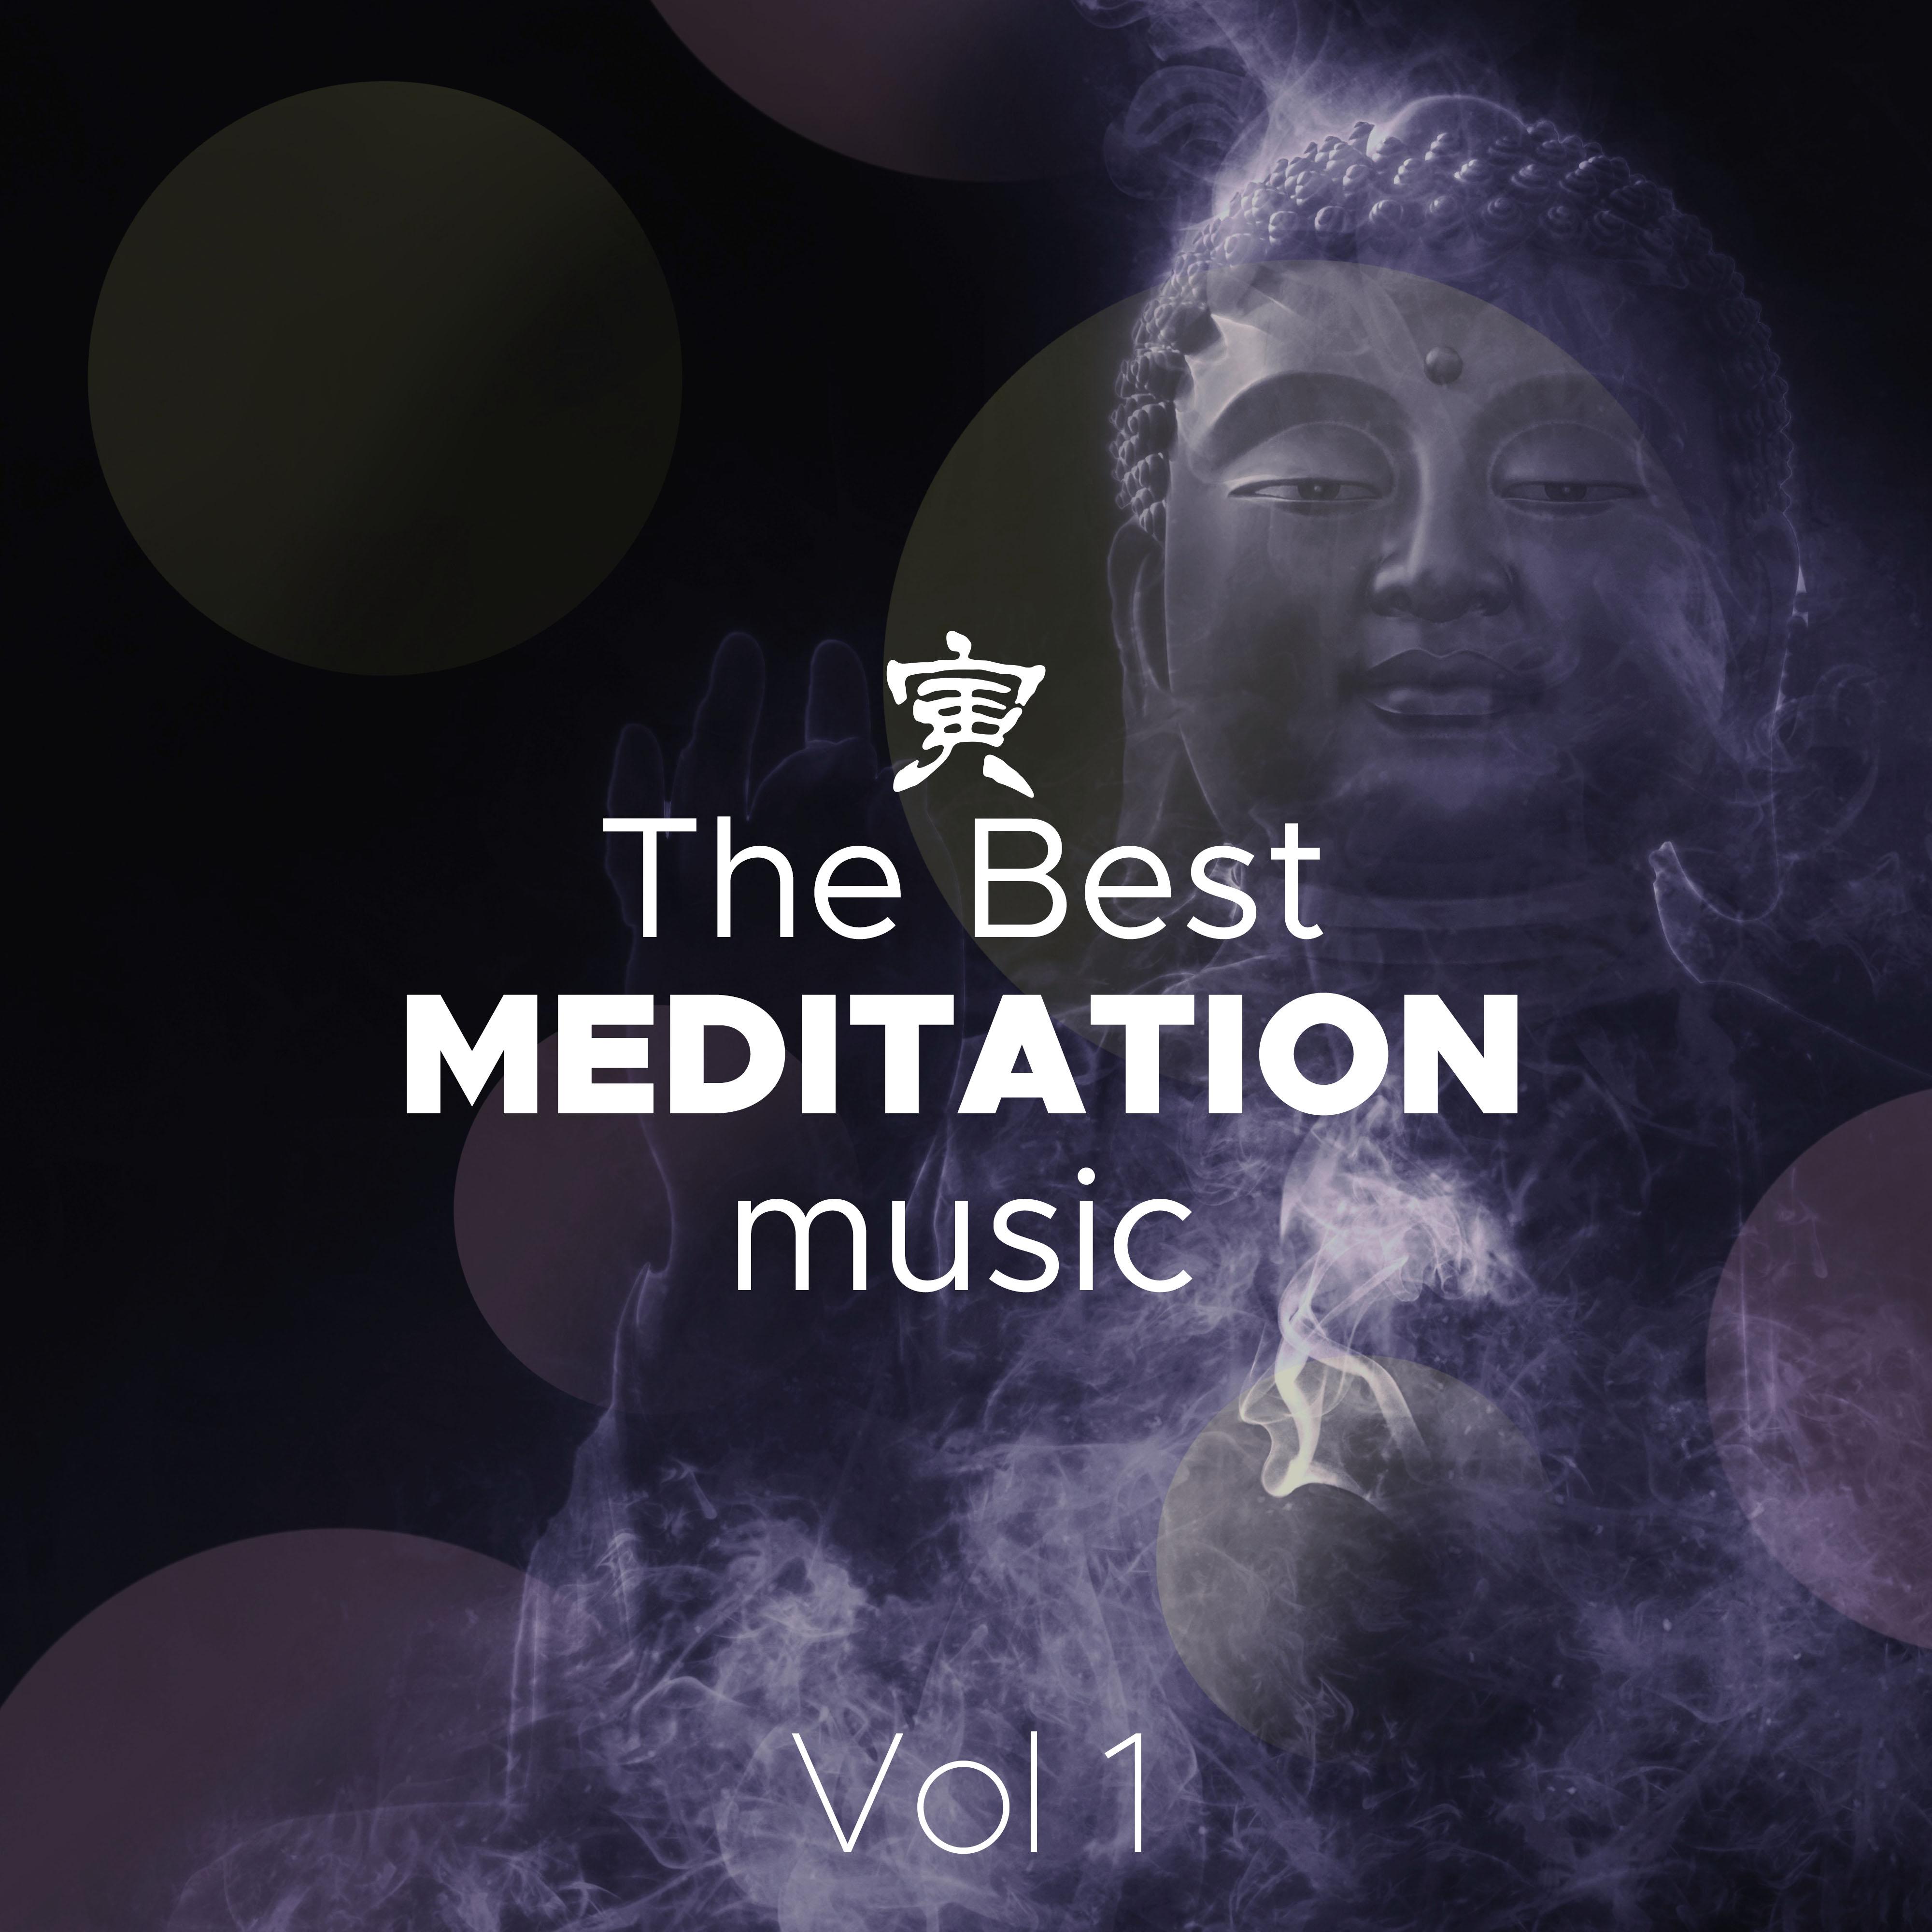 The Best Meditation Music Vol 1 - Top Asian, Chinese, Japanese and Tibetan Meditations Tracks to find Peace and Relaxation